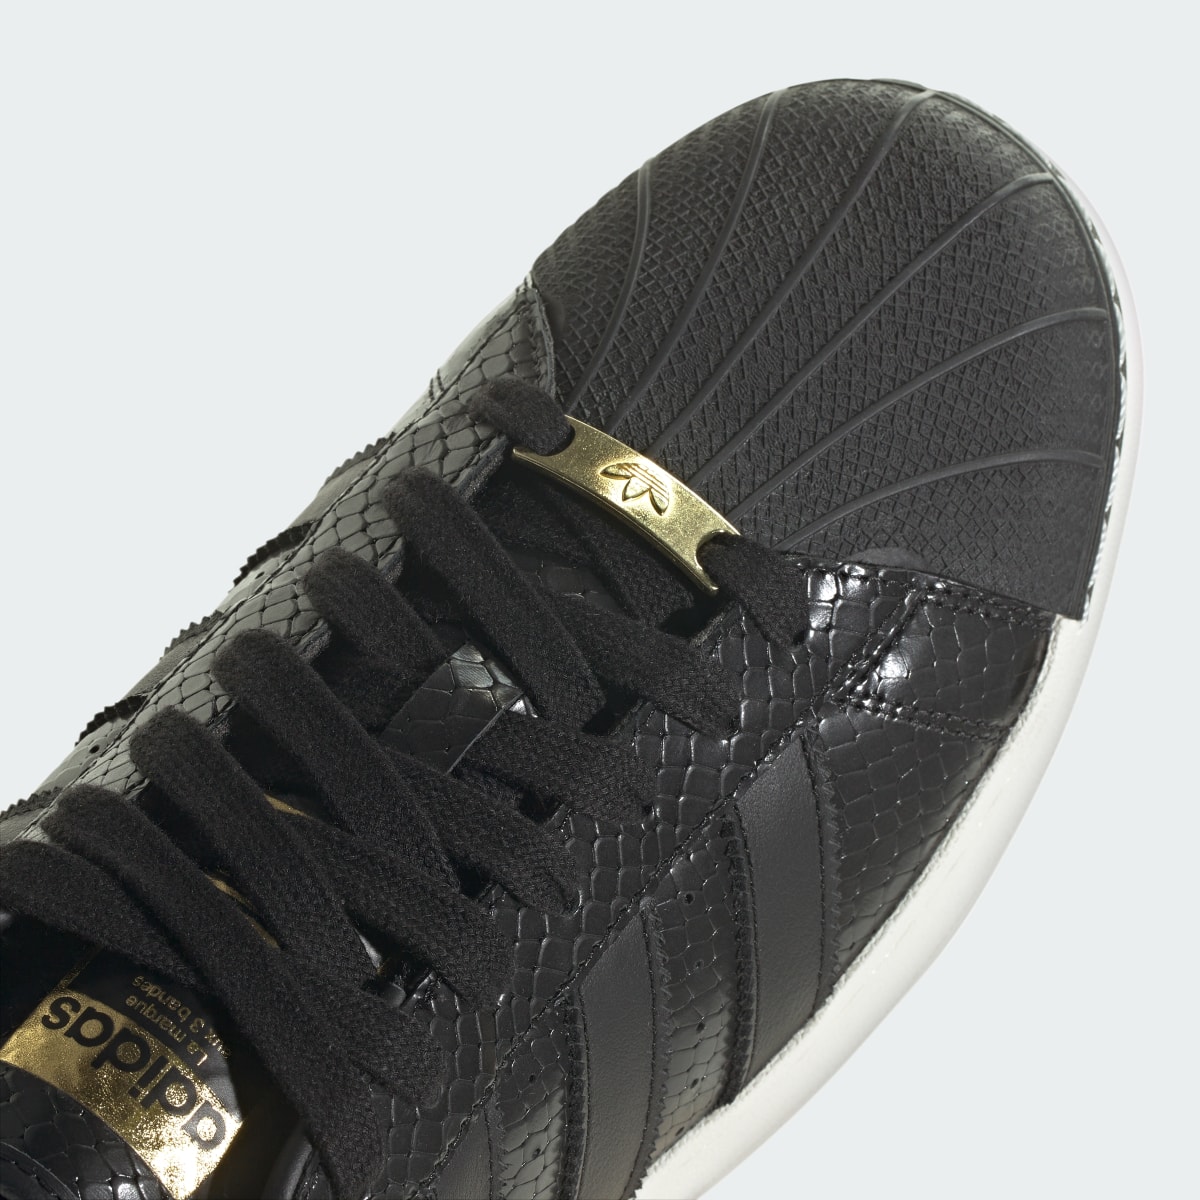 Adidas Superstar XLG Shoes. 10